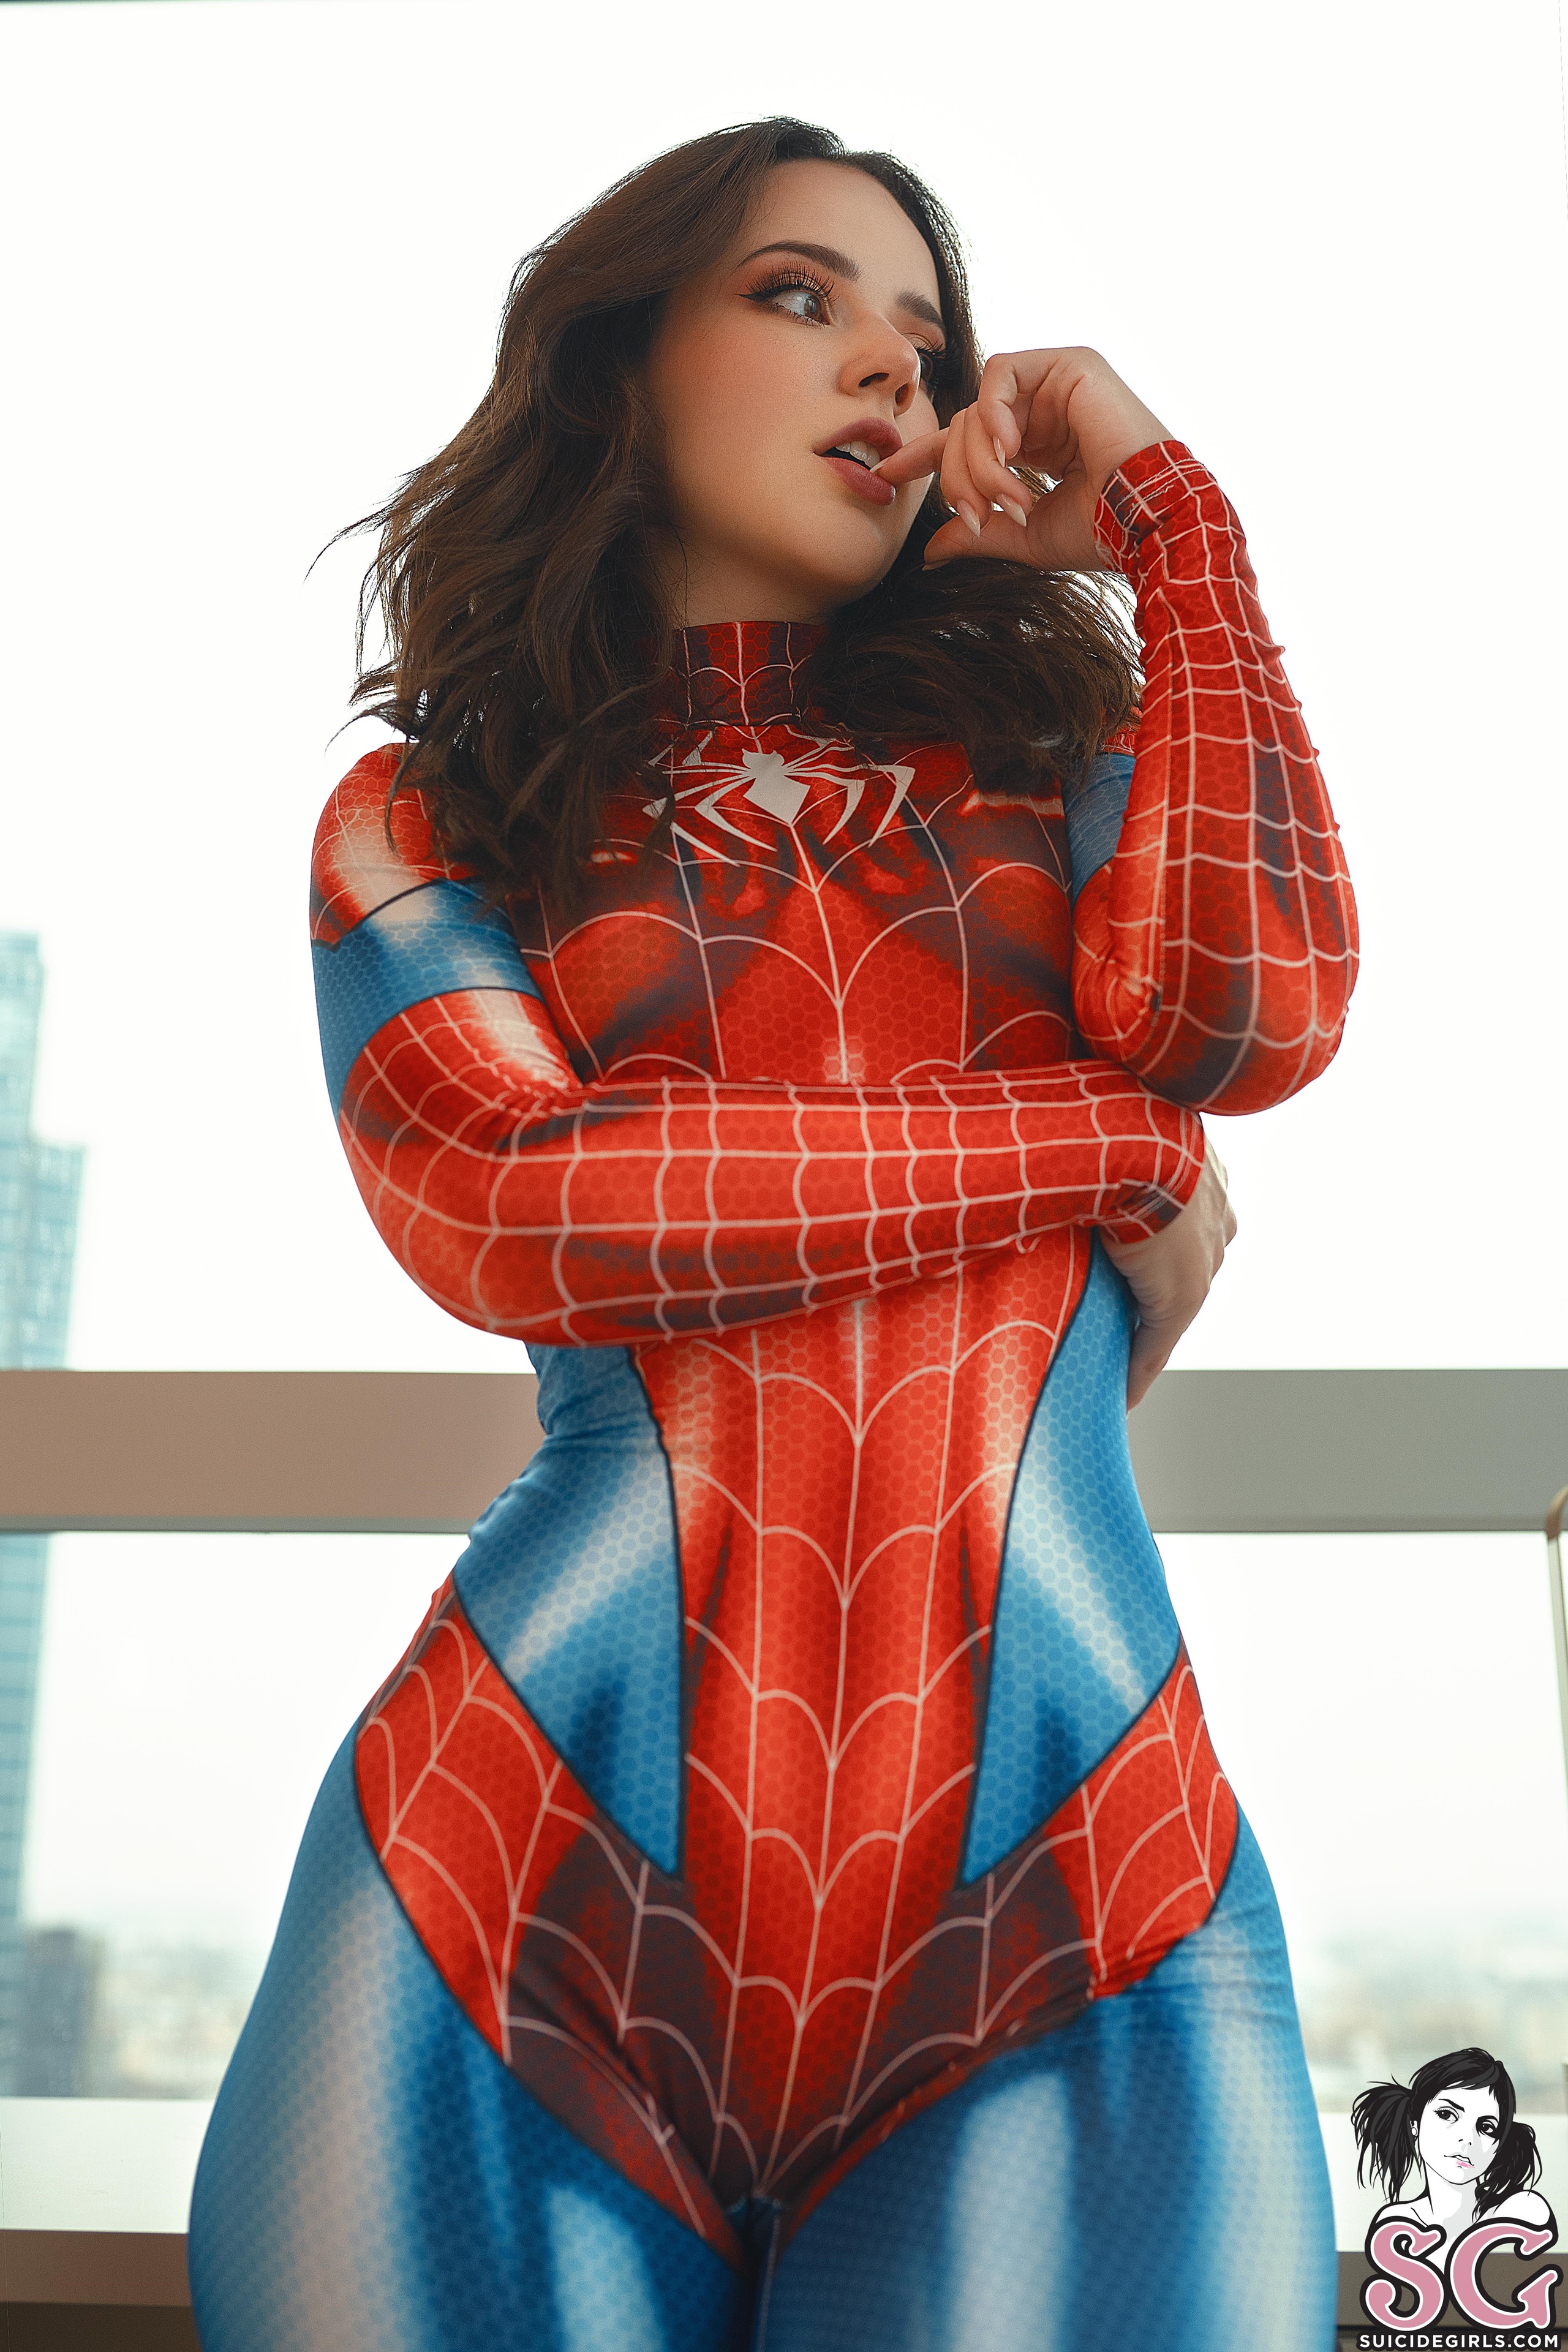 People 2560x3840 Ceciamix Suicide Girls women model Spider-Man curvy finger in mouth portrait display looking away tight clothing tight waist